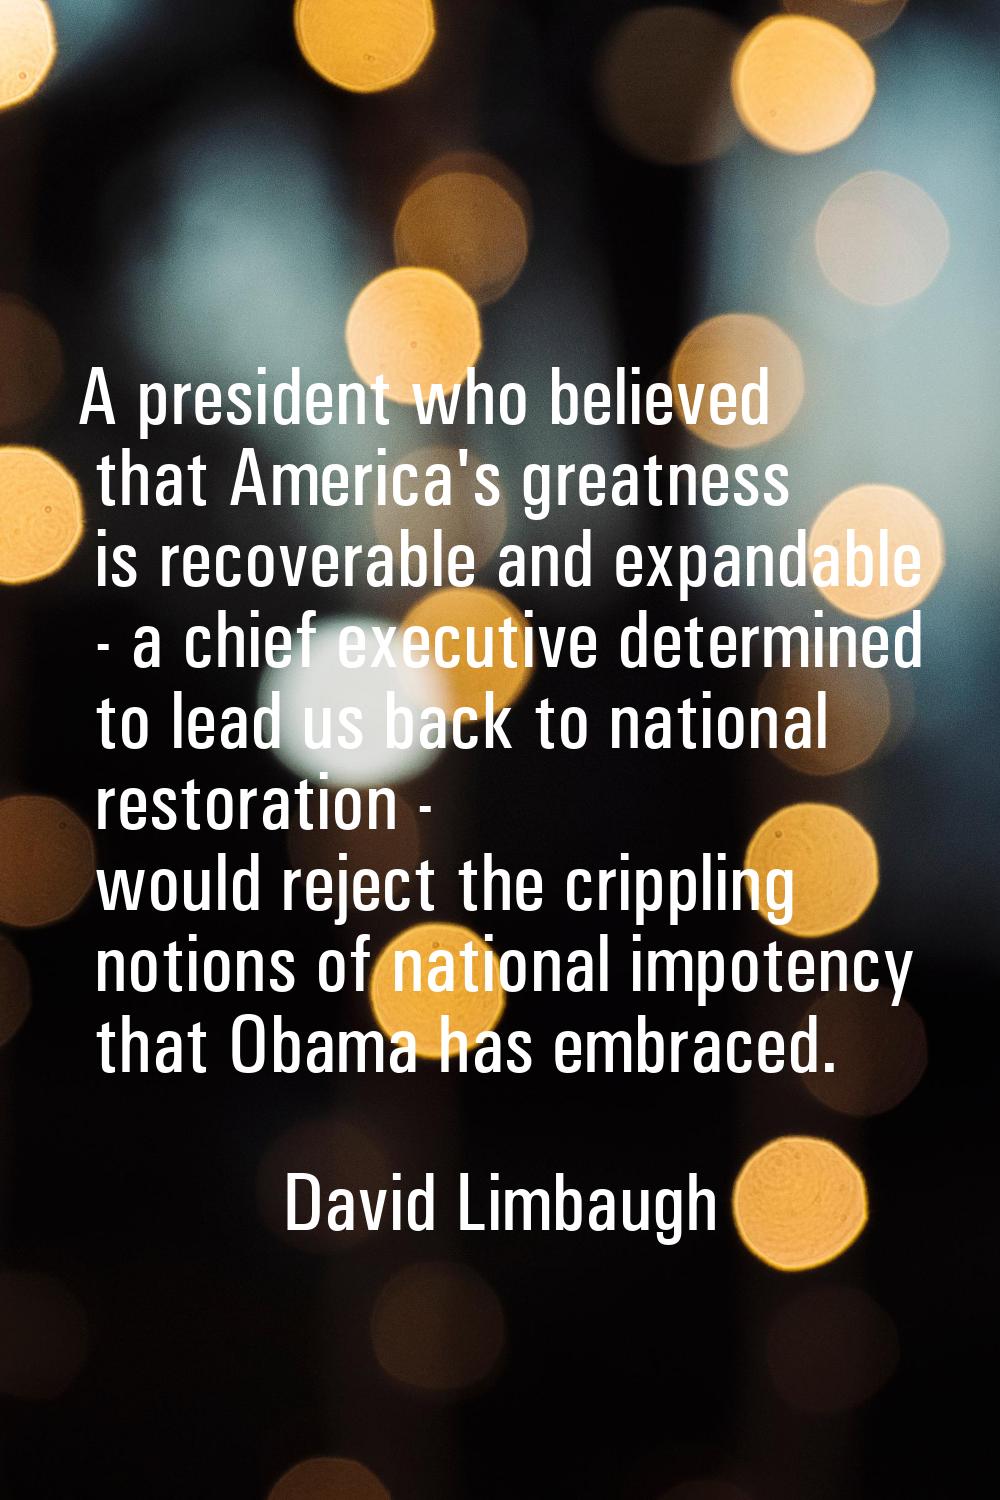 A president who believed that America's greatness is recoverable and expandable - a chief executive